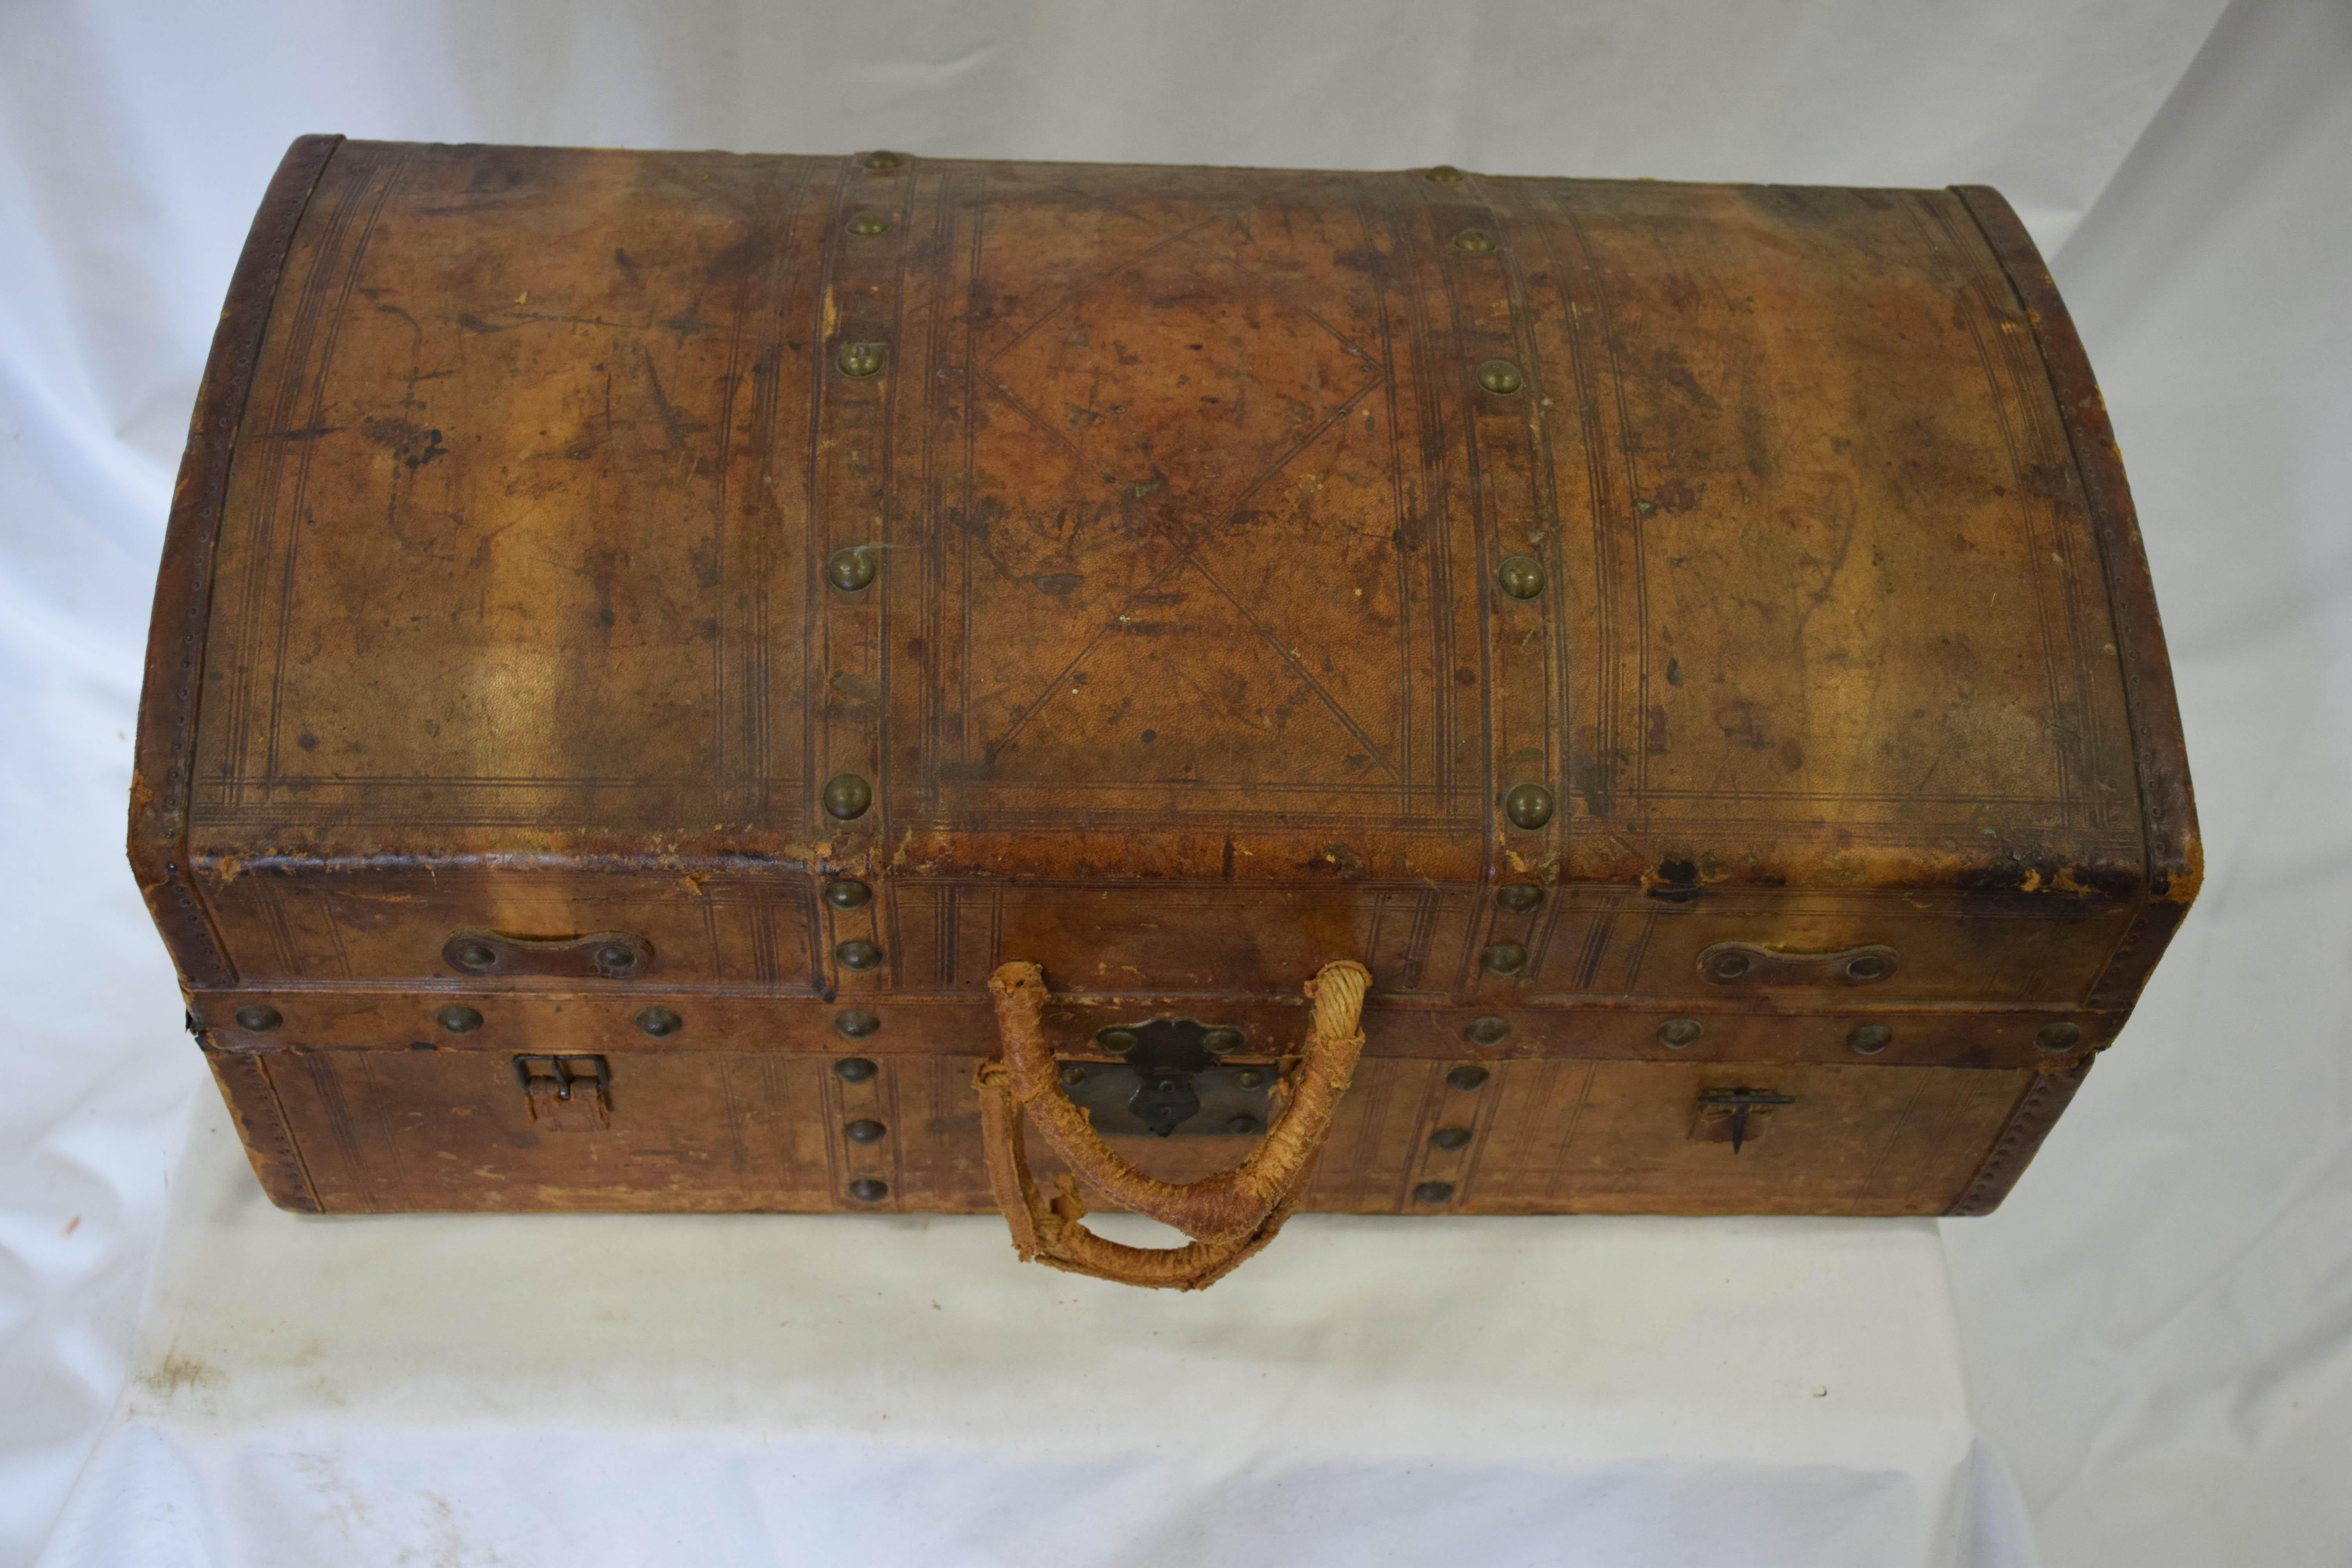 Antique travel dome trunk shipping luggage case in distressed vintage leather.
Fabulous toile fabric lined interior. With compartments. Charming historical character and vintage patina.
Original unrestored distressed condition. Scuffs present. No